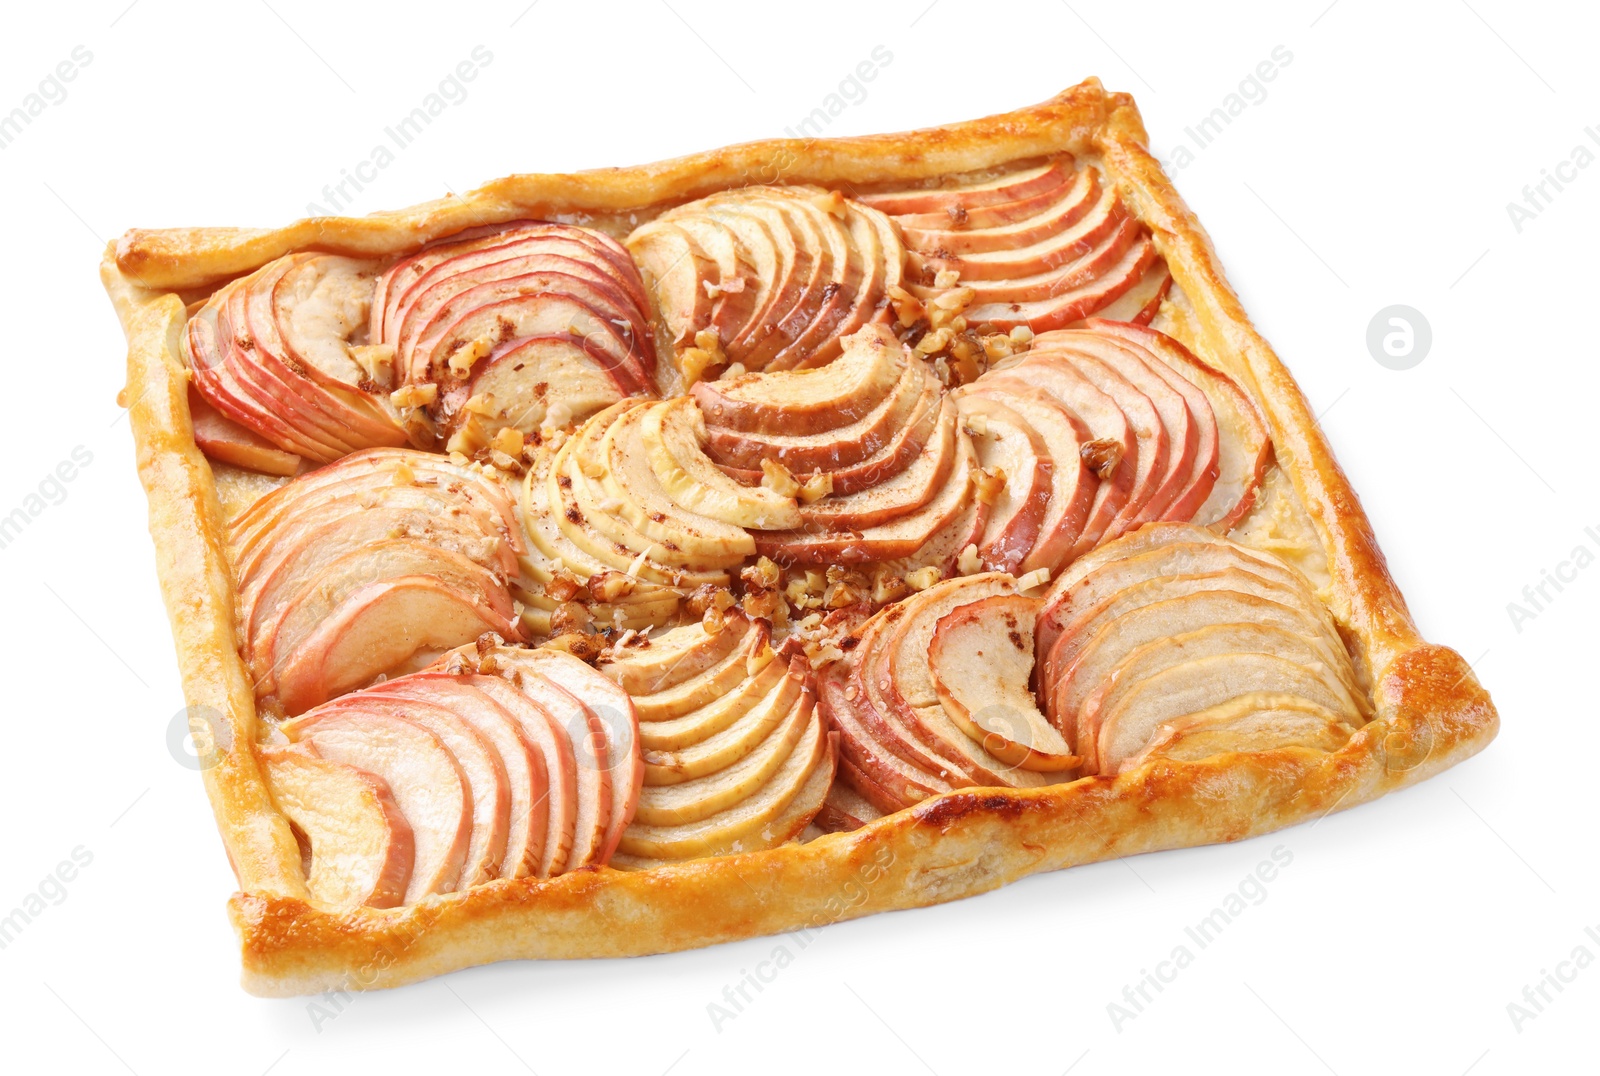 Photo of Freshly baked apple pie with nuts isolated on white